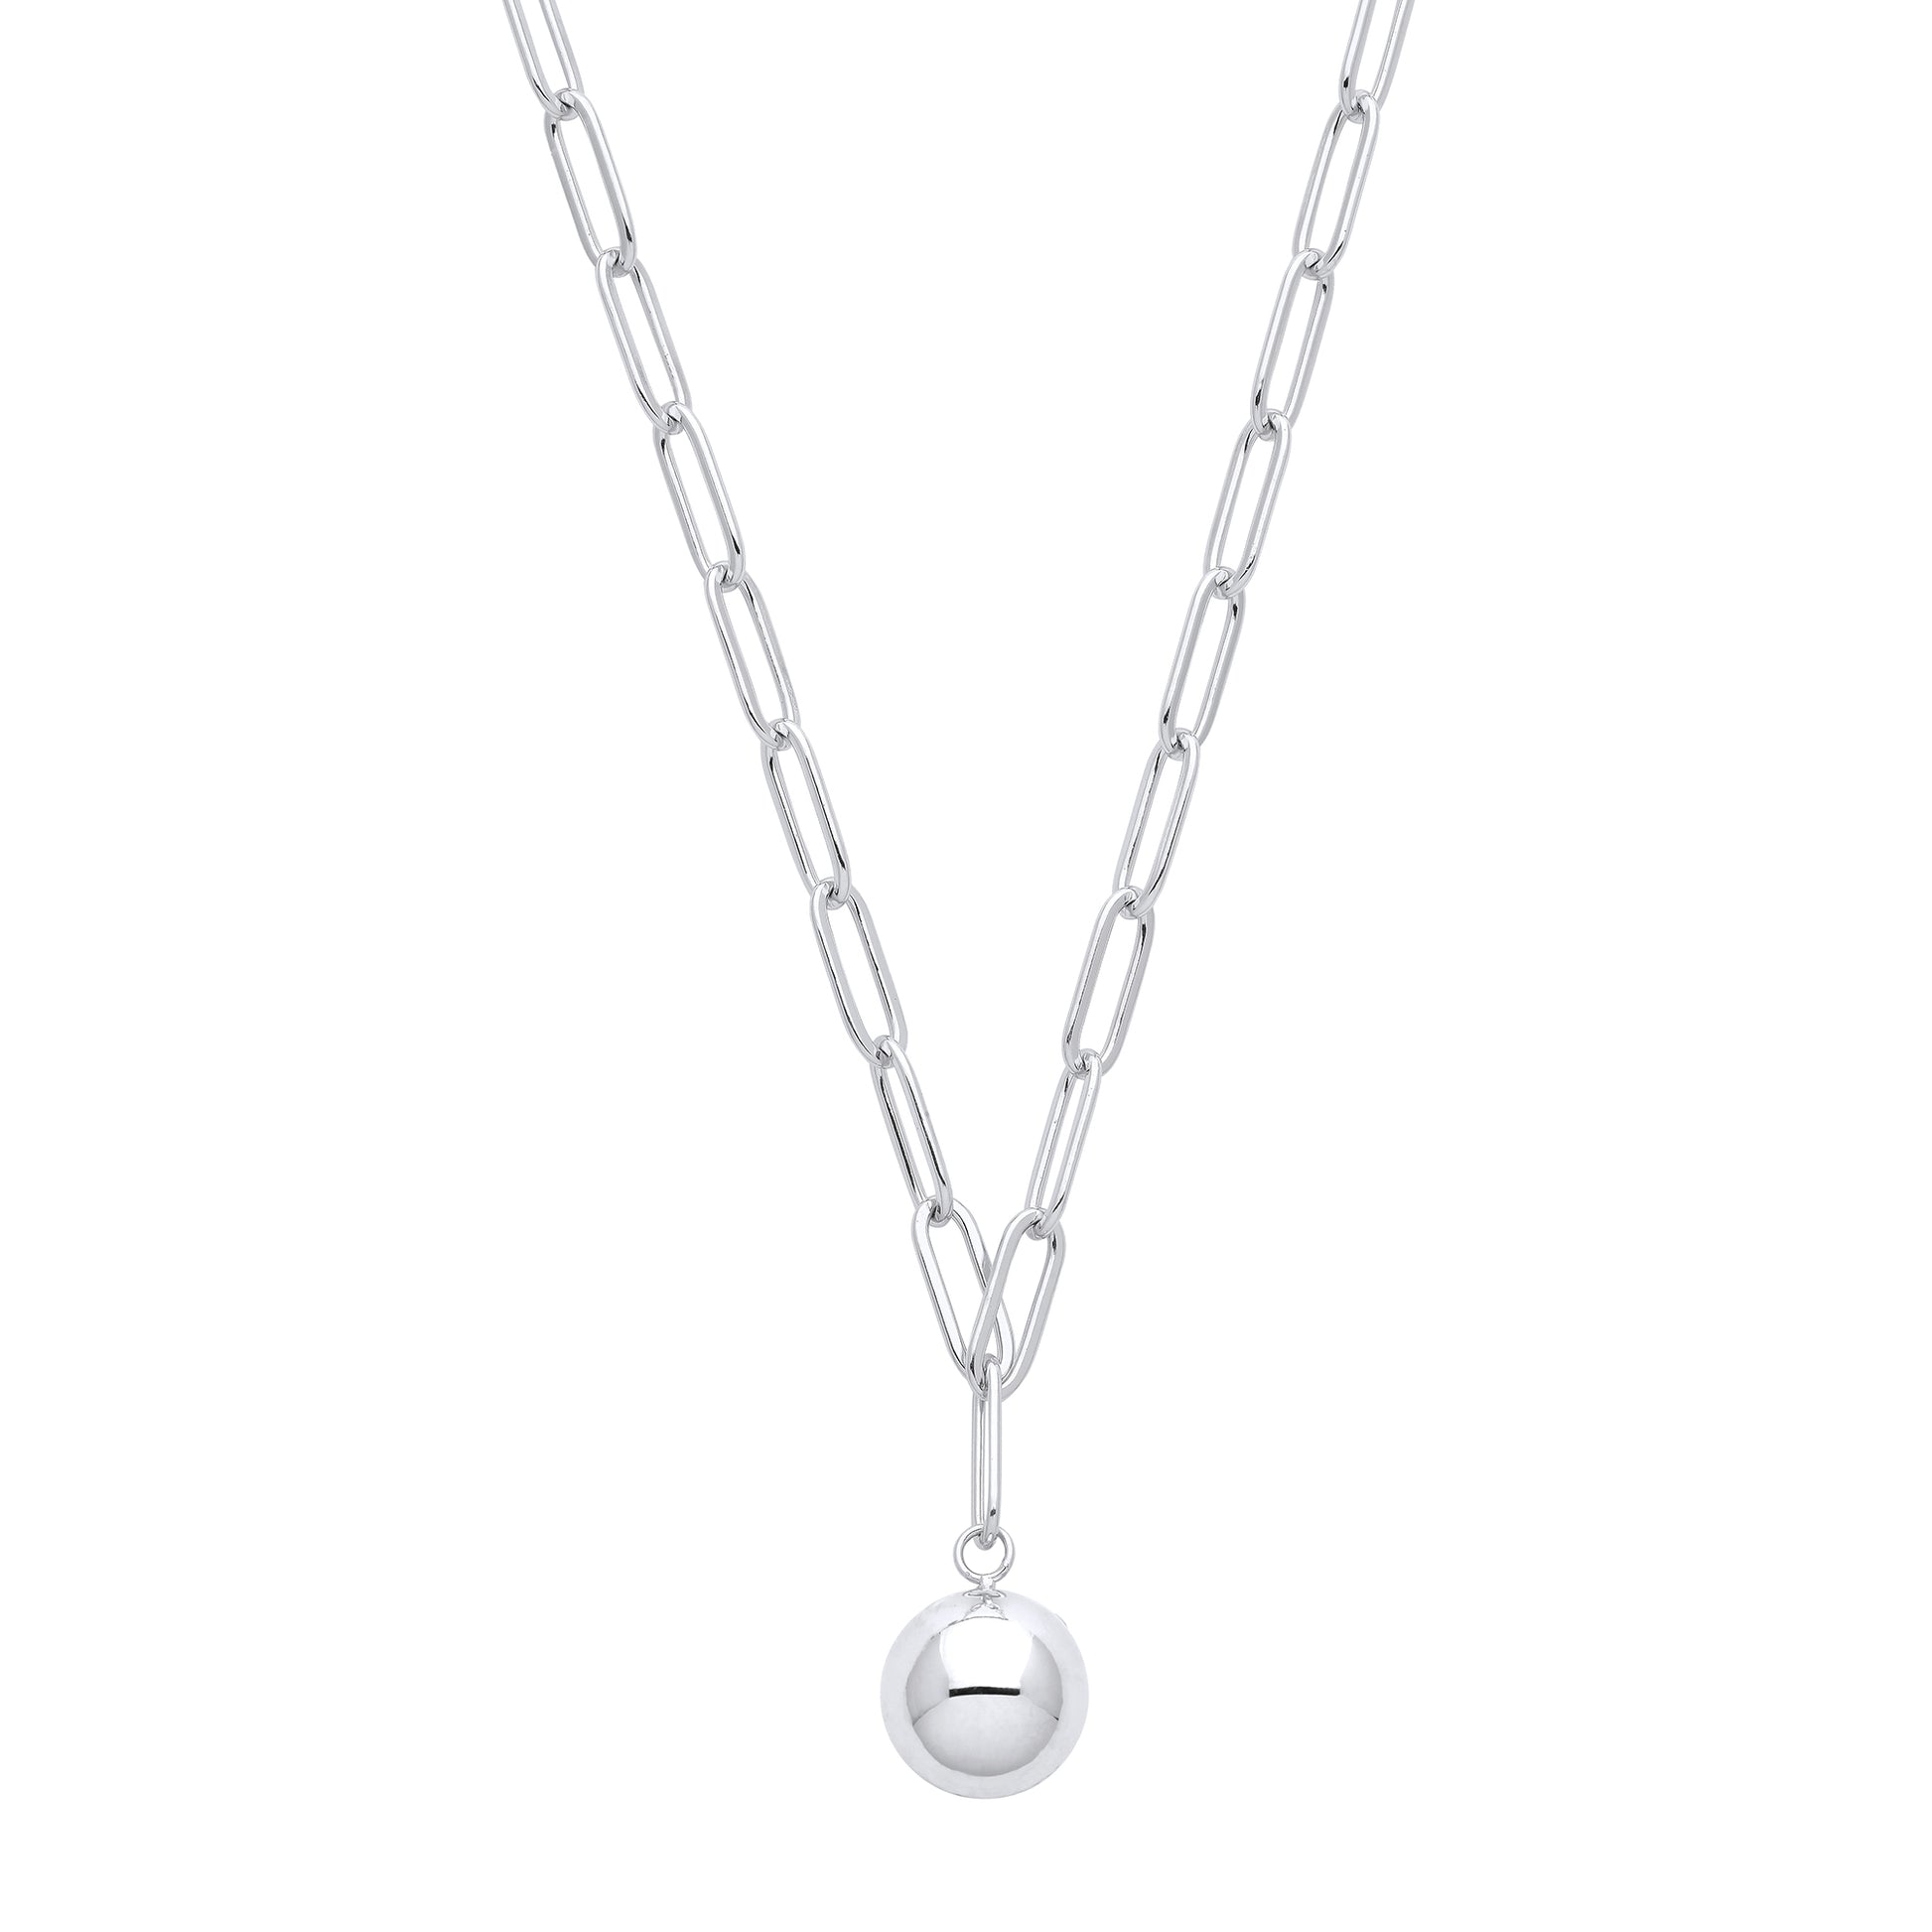 Silver  Flat Paperclip Round Ball Pendant Necklace - GVK378